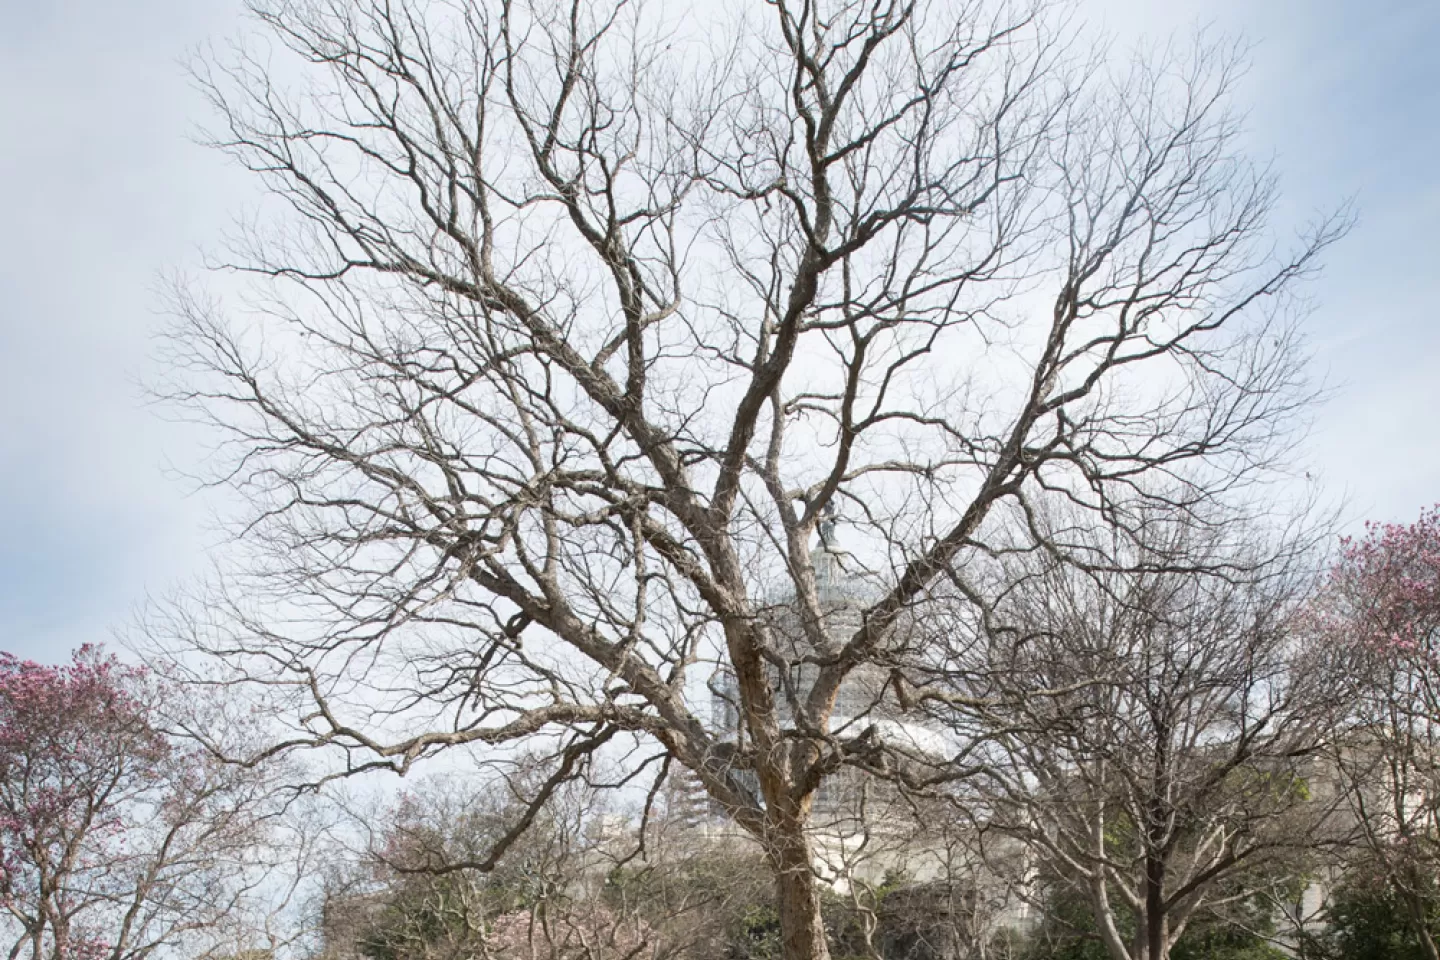 The Rep. Slayden tree on the U.S. Capitol Grounds during winter.